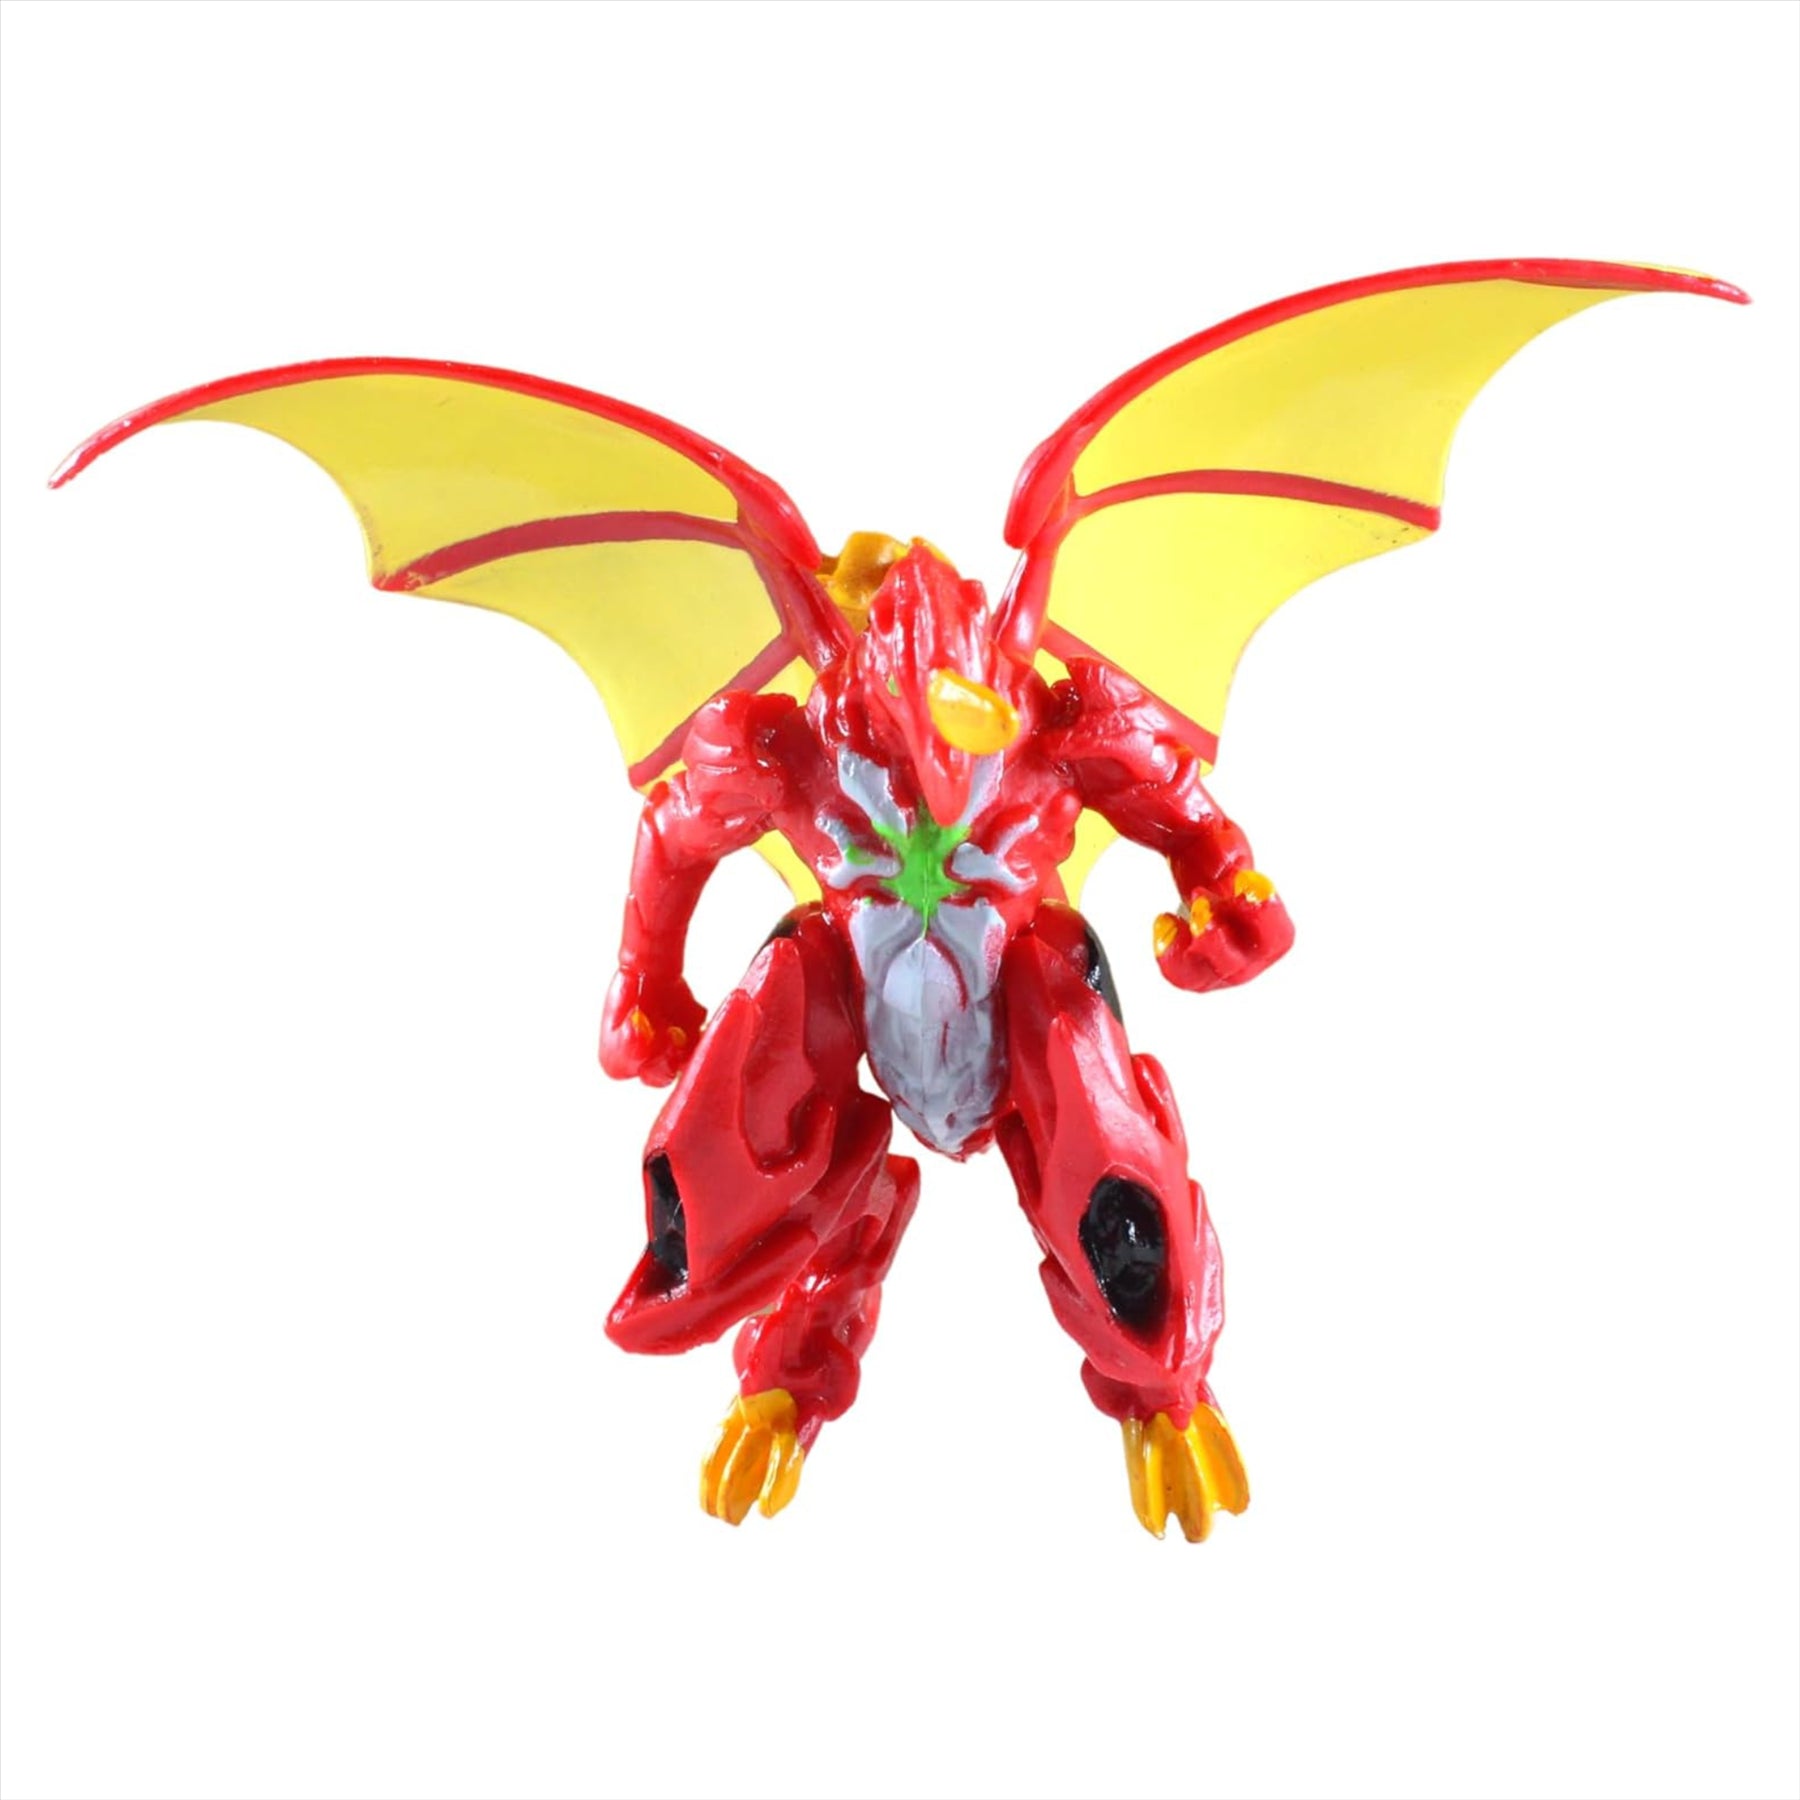 Bakugan - Deluxe Collector Figure Bundles With 2x Cards & Coin In Each Pack - Dragonoid Red & Hydorous Dark Blue - Toptoys2u